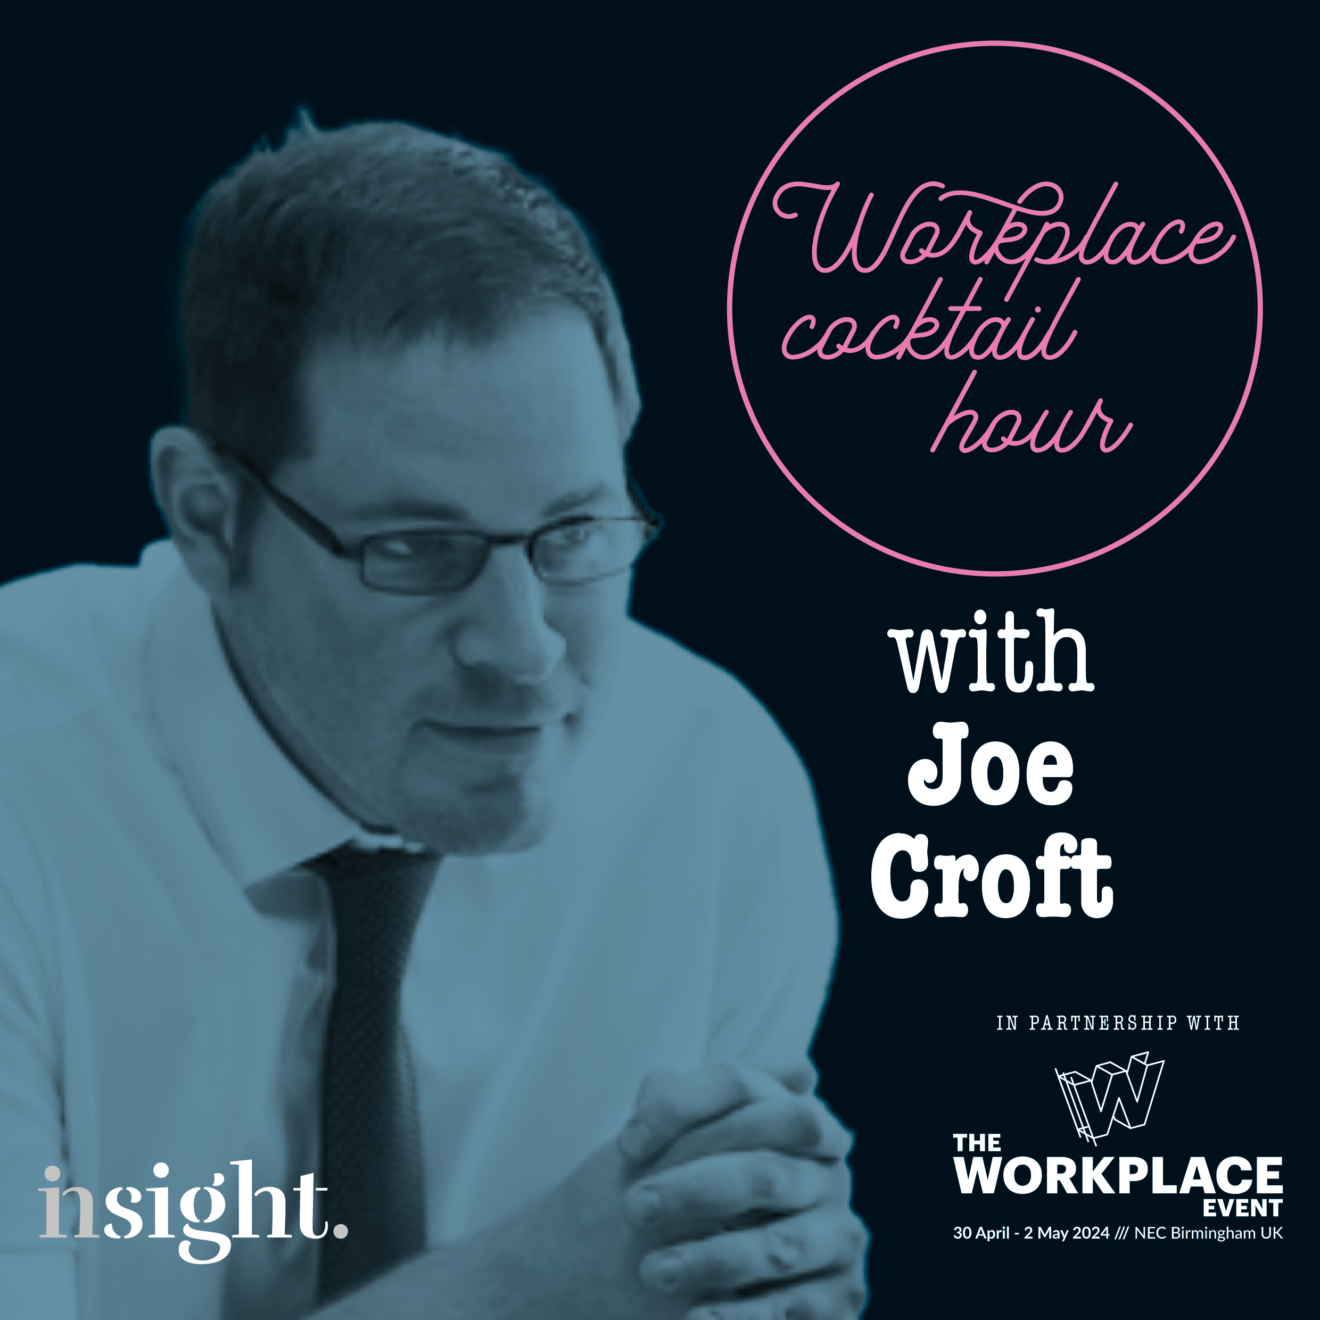 No more zero sum games ... the Workplace Cocktail Hour with Joe Croft